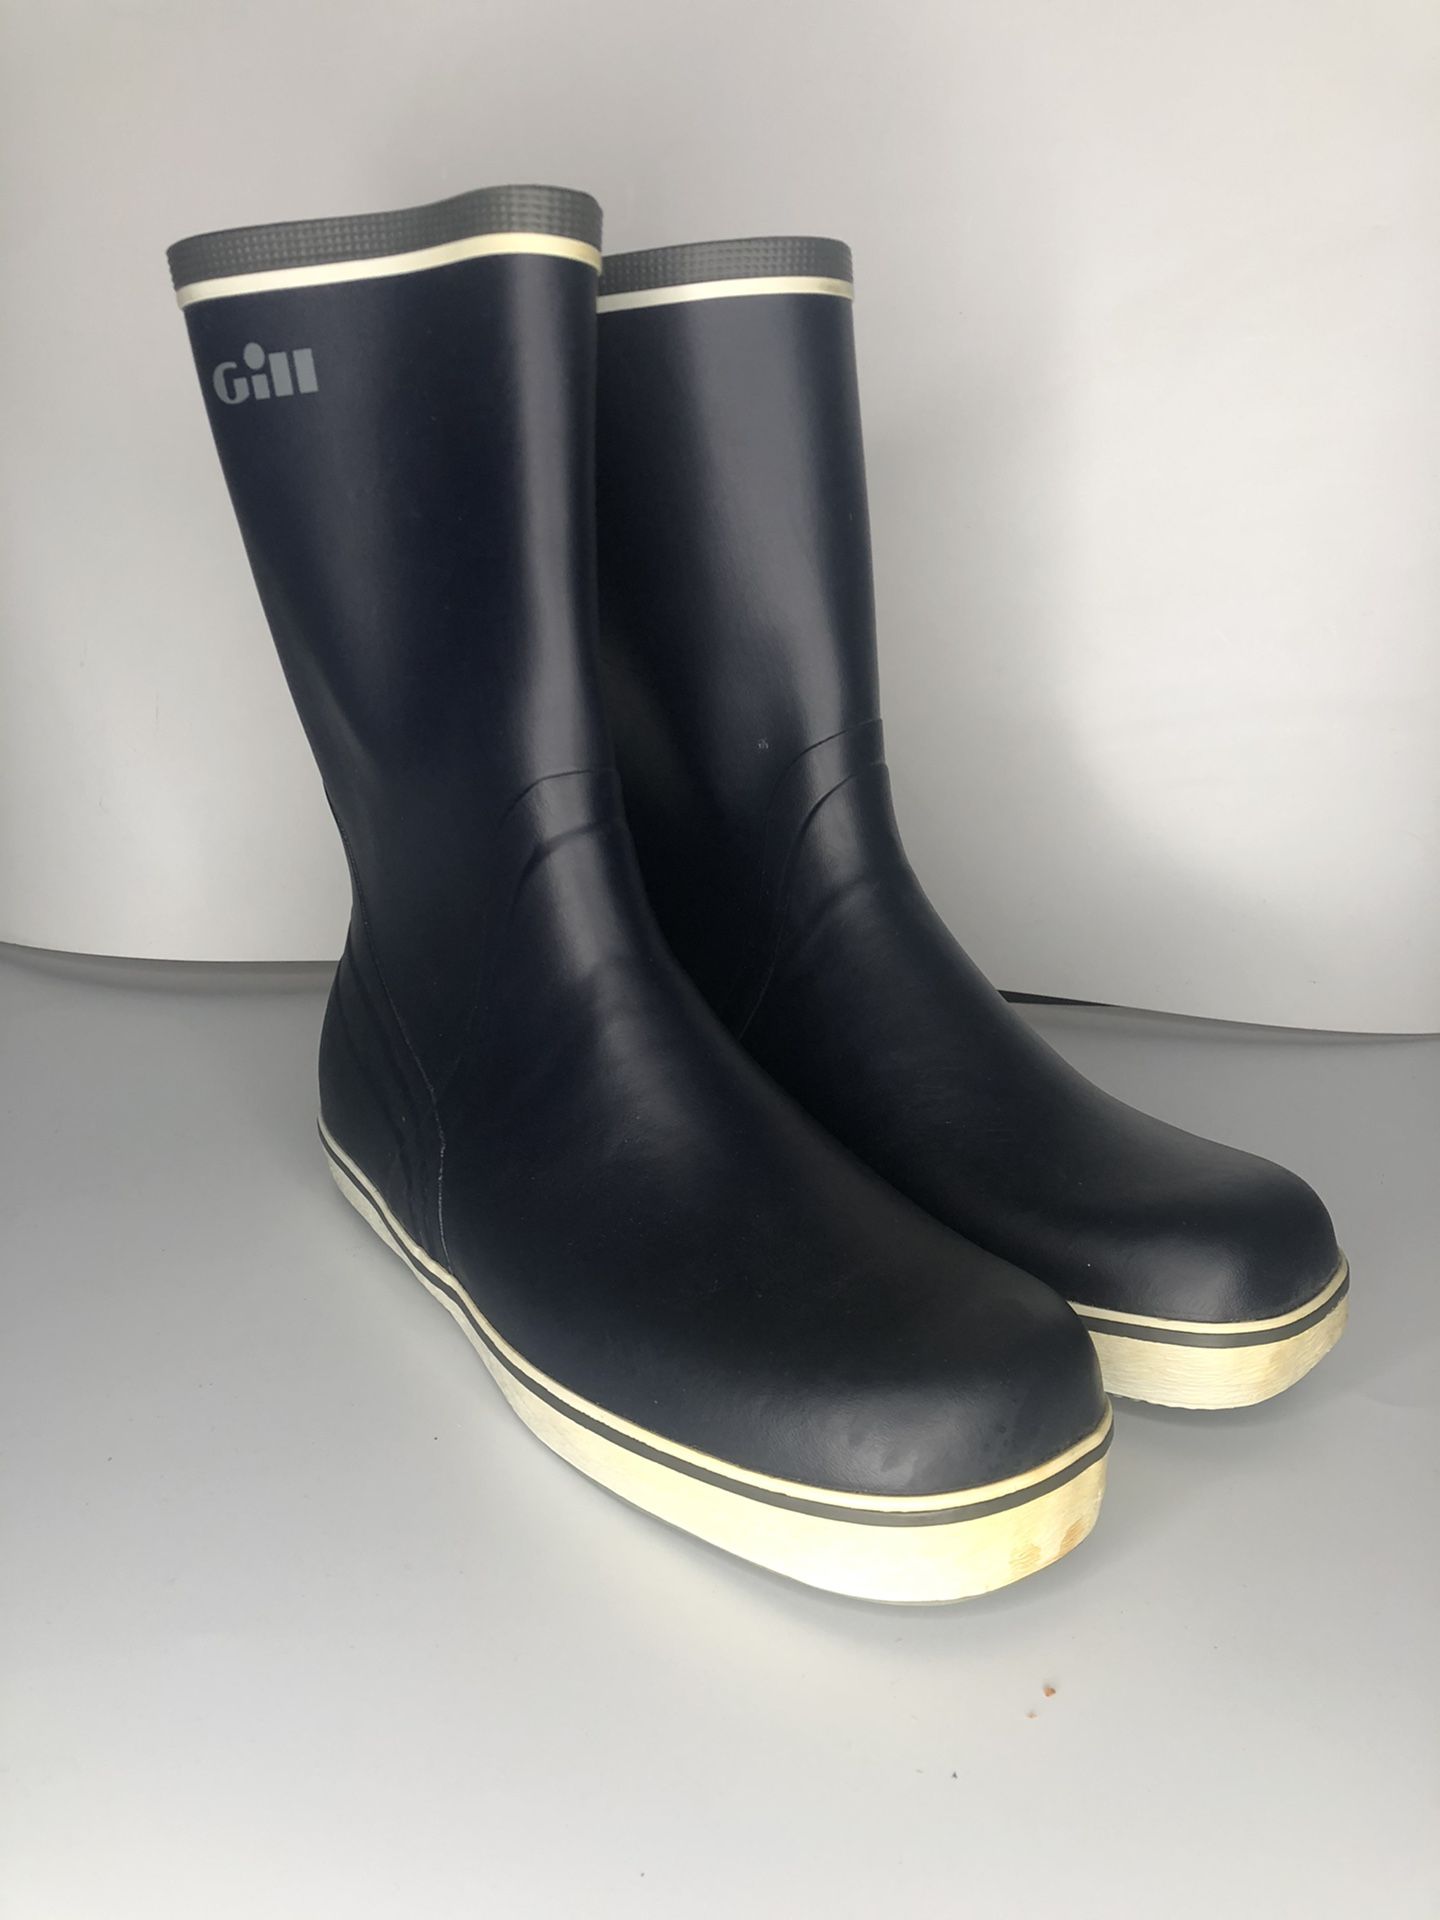 Gill Marine Boots Size 11 For Fishing Boat Sailing